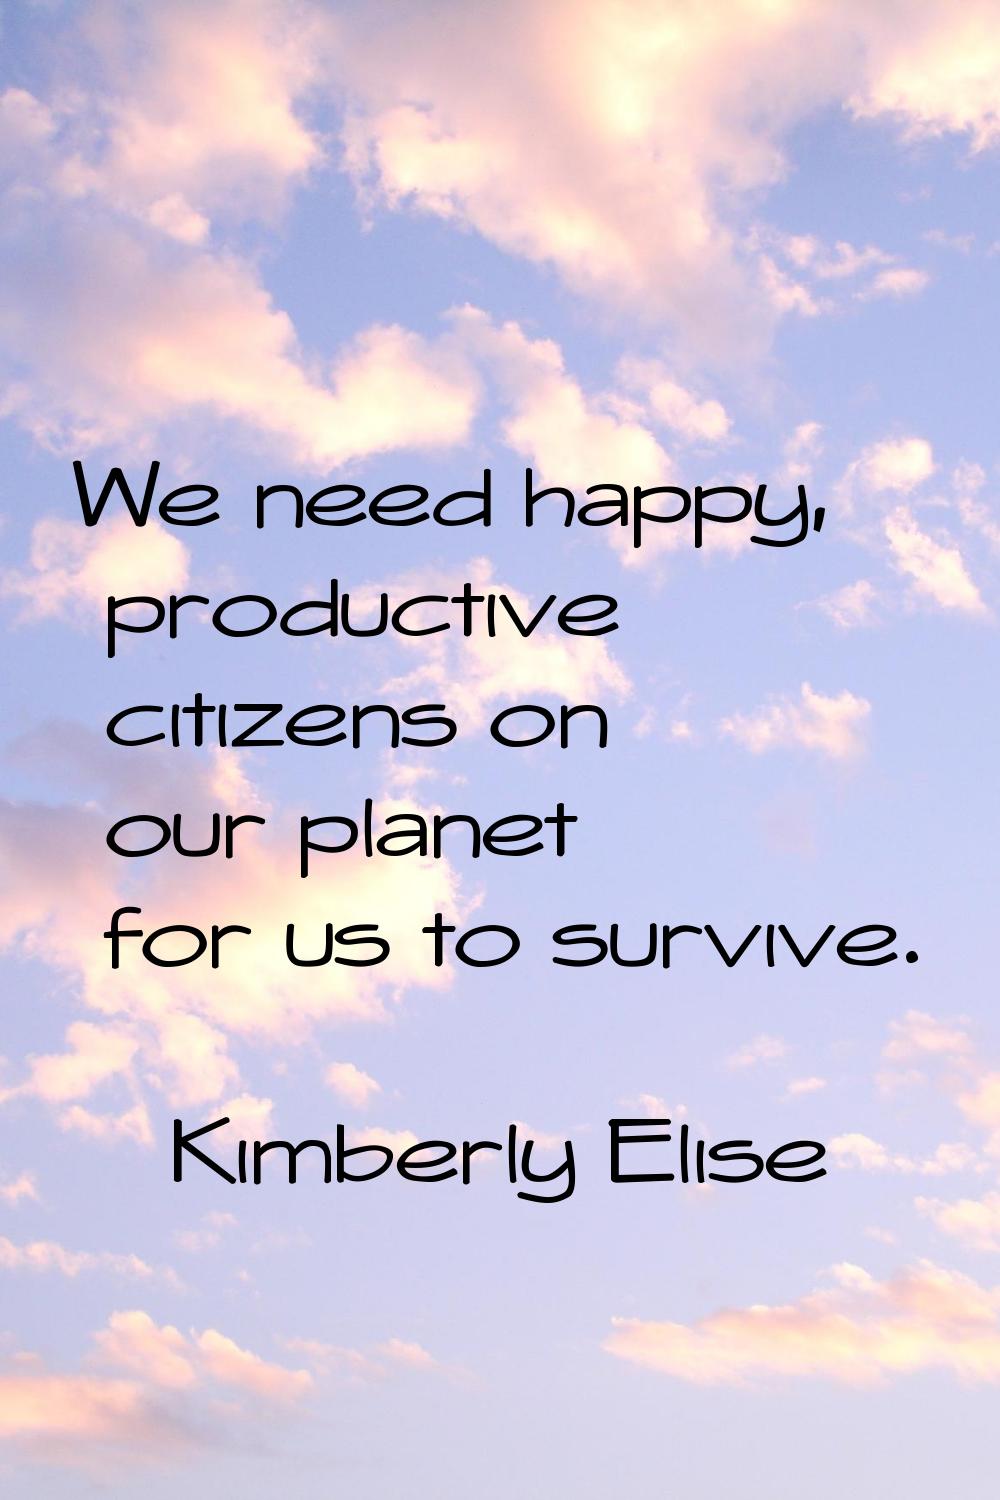 We need happy, productive citizens on our planet for us to survive.